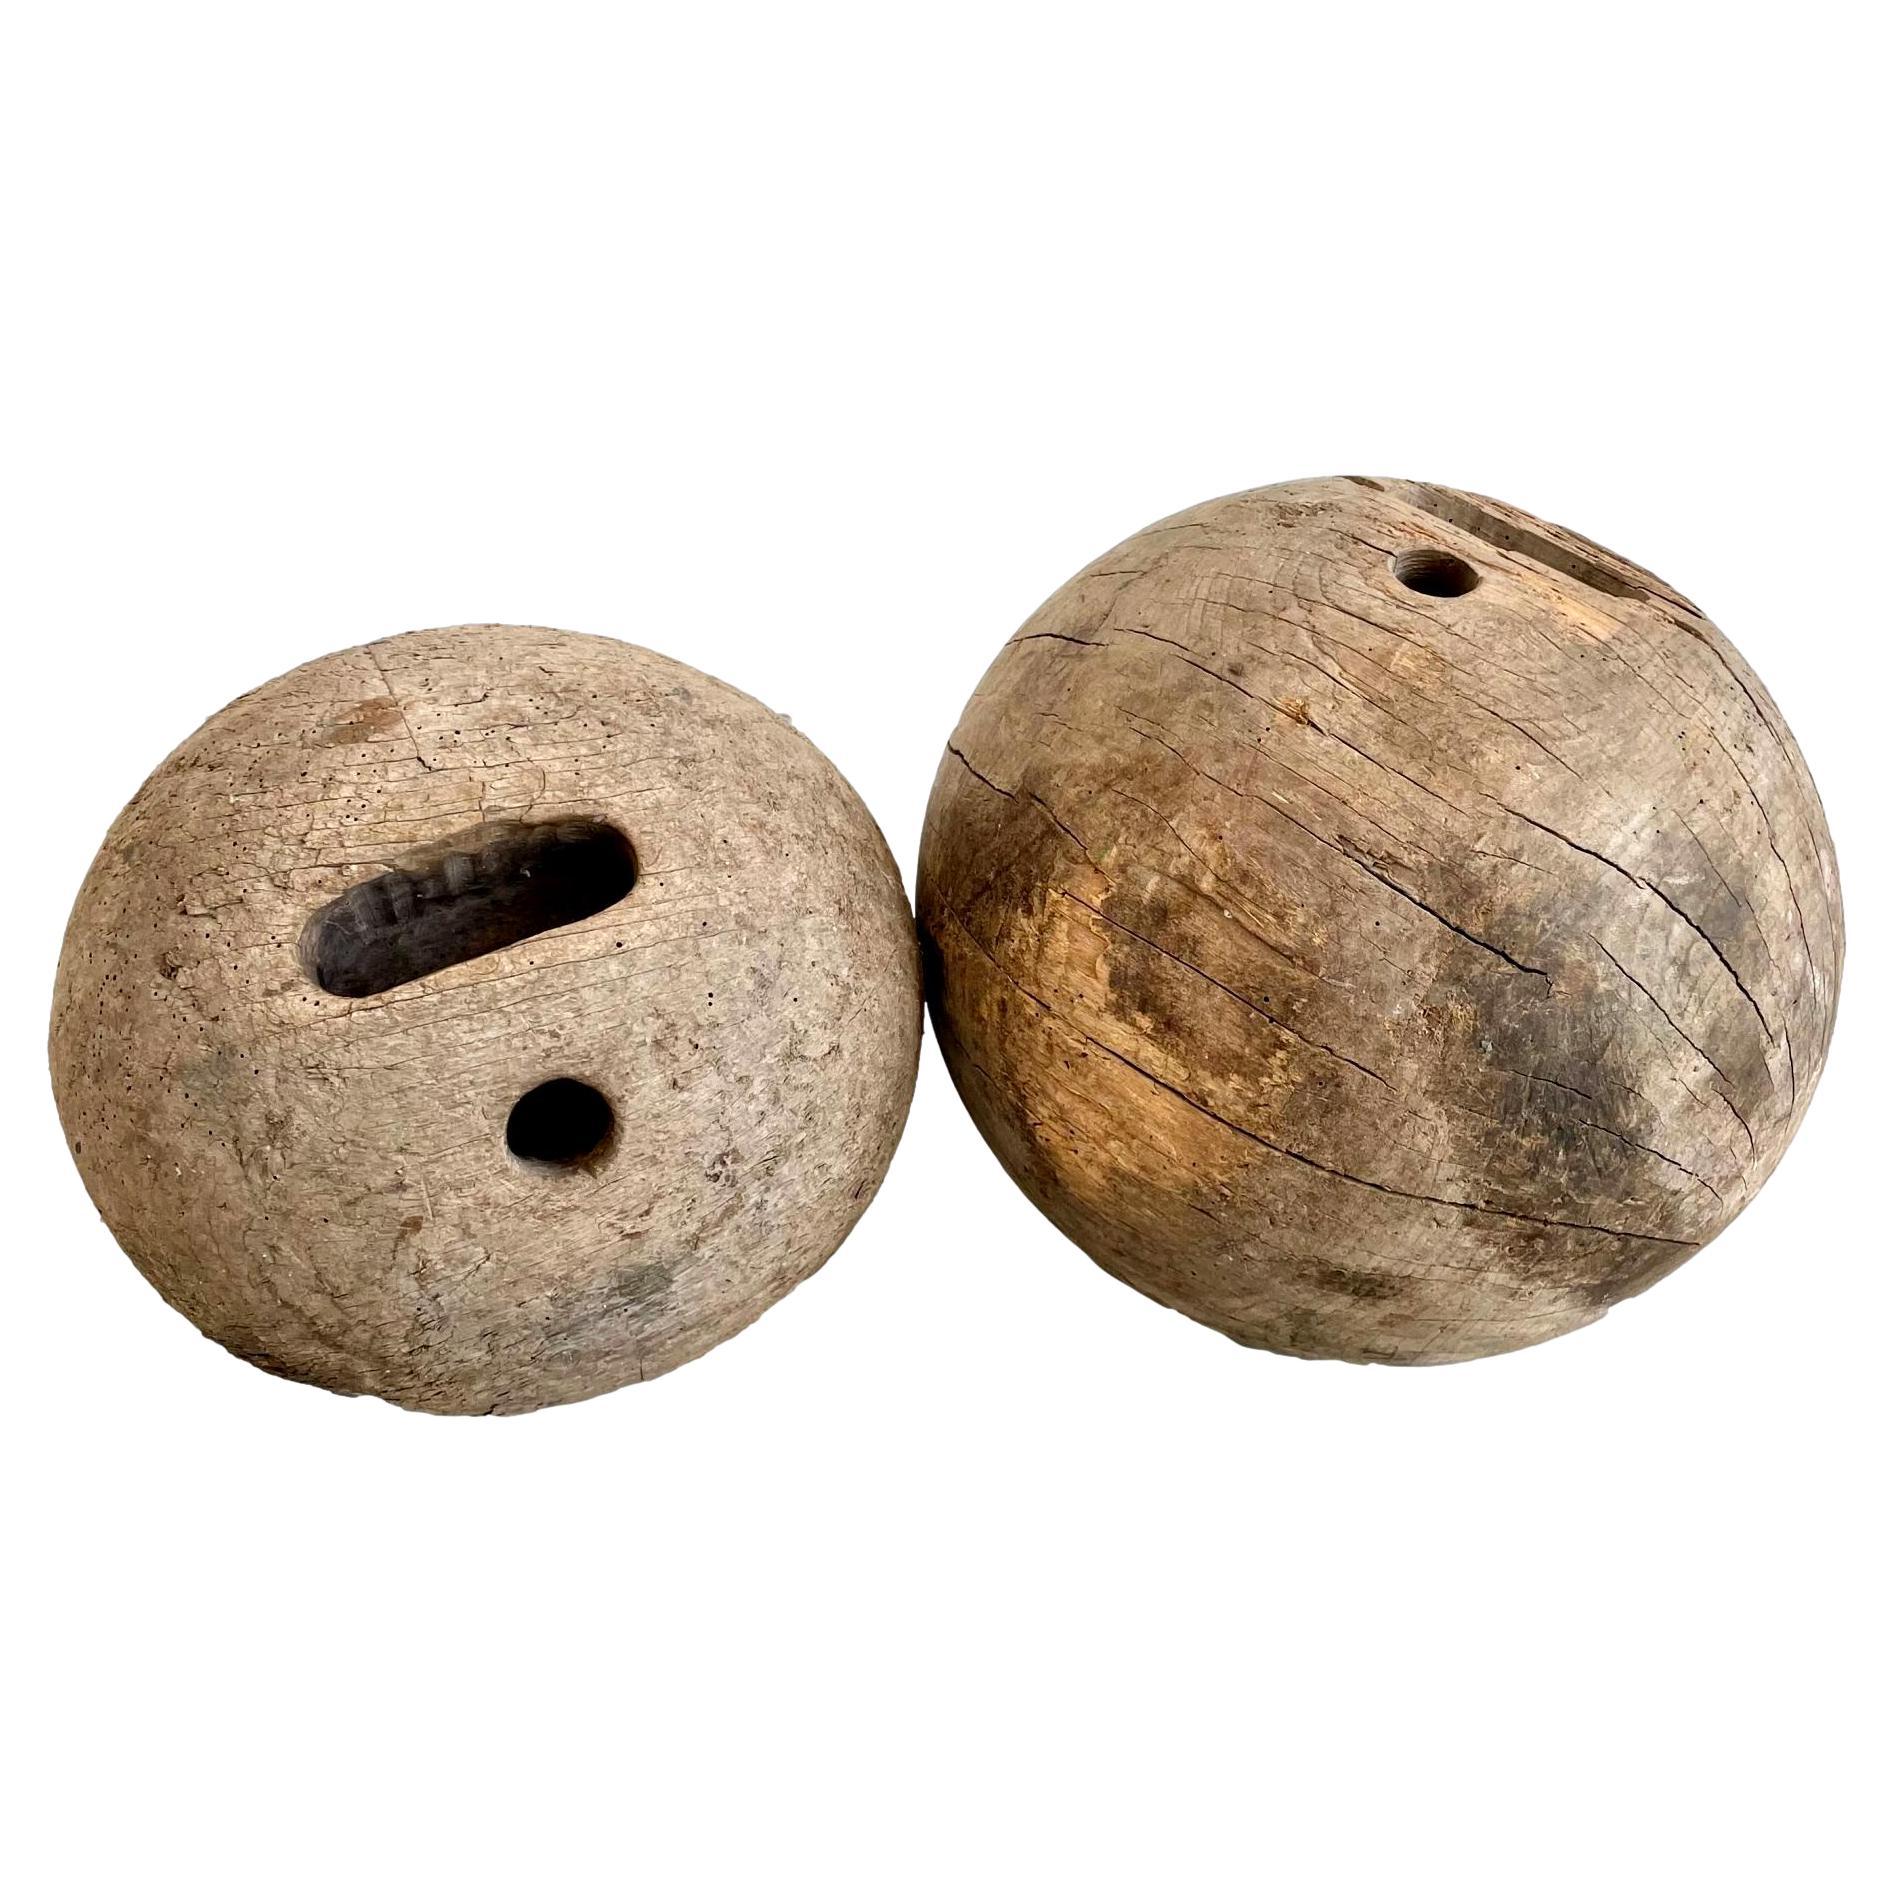 Giant Hand-Made Wooden Bowling Balls, 1960s France For Sale